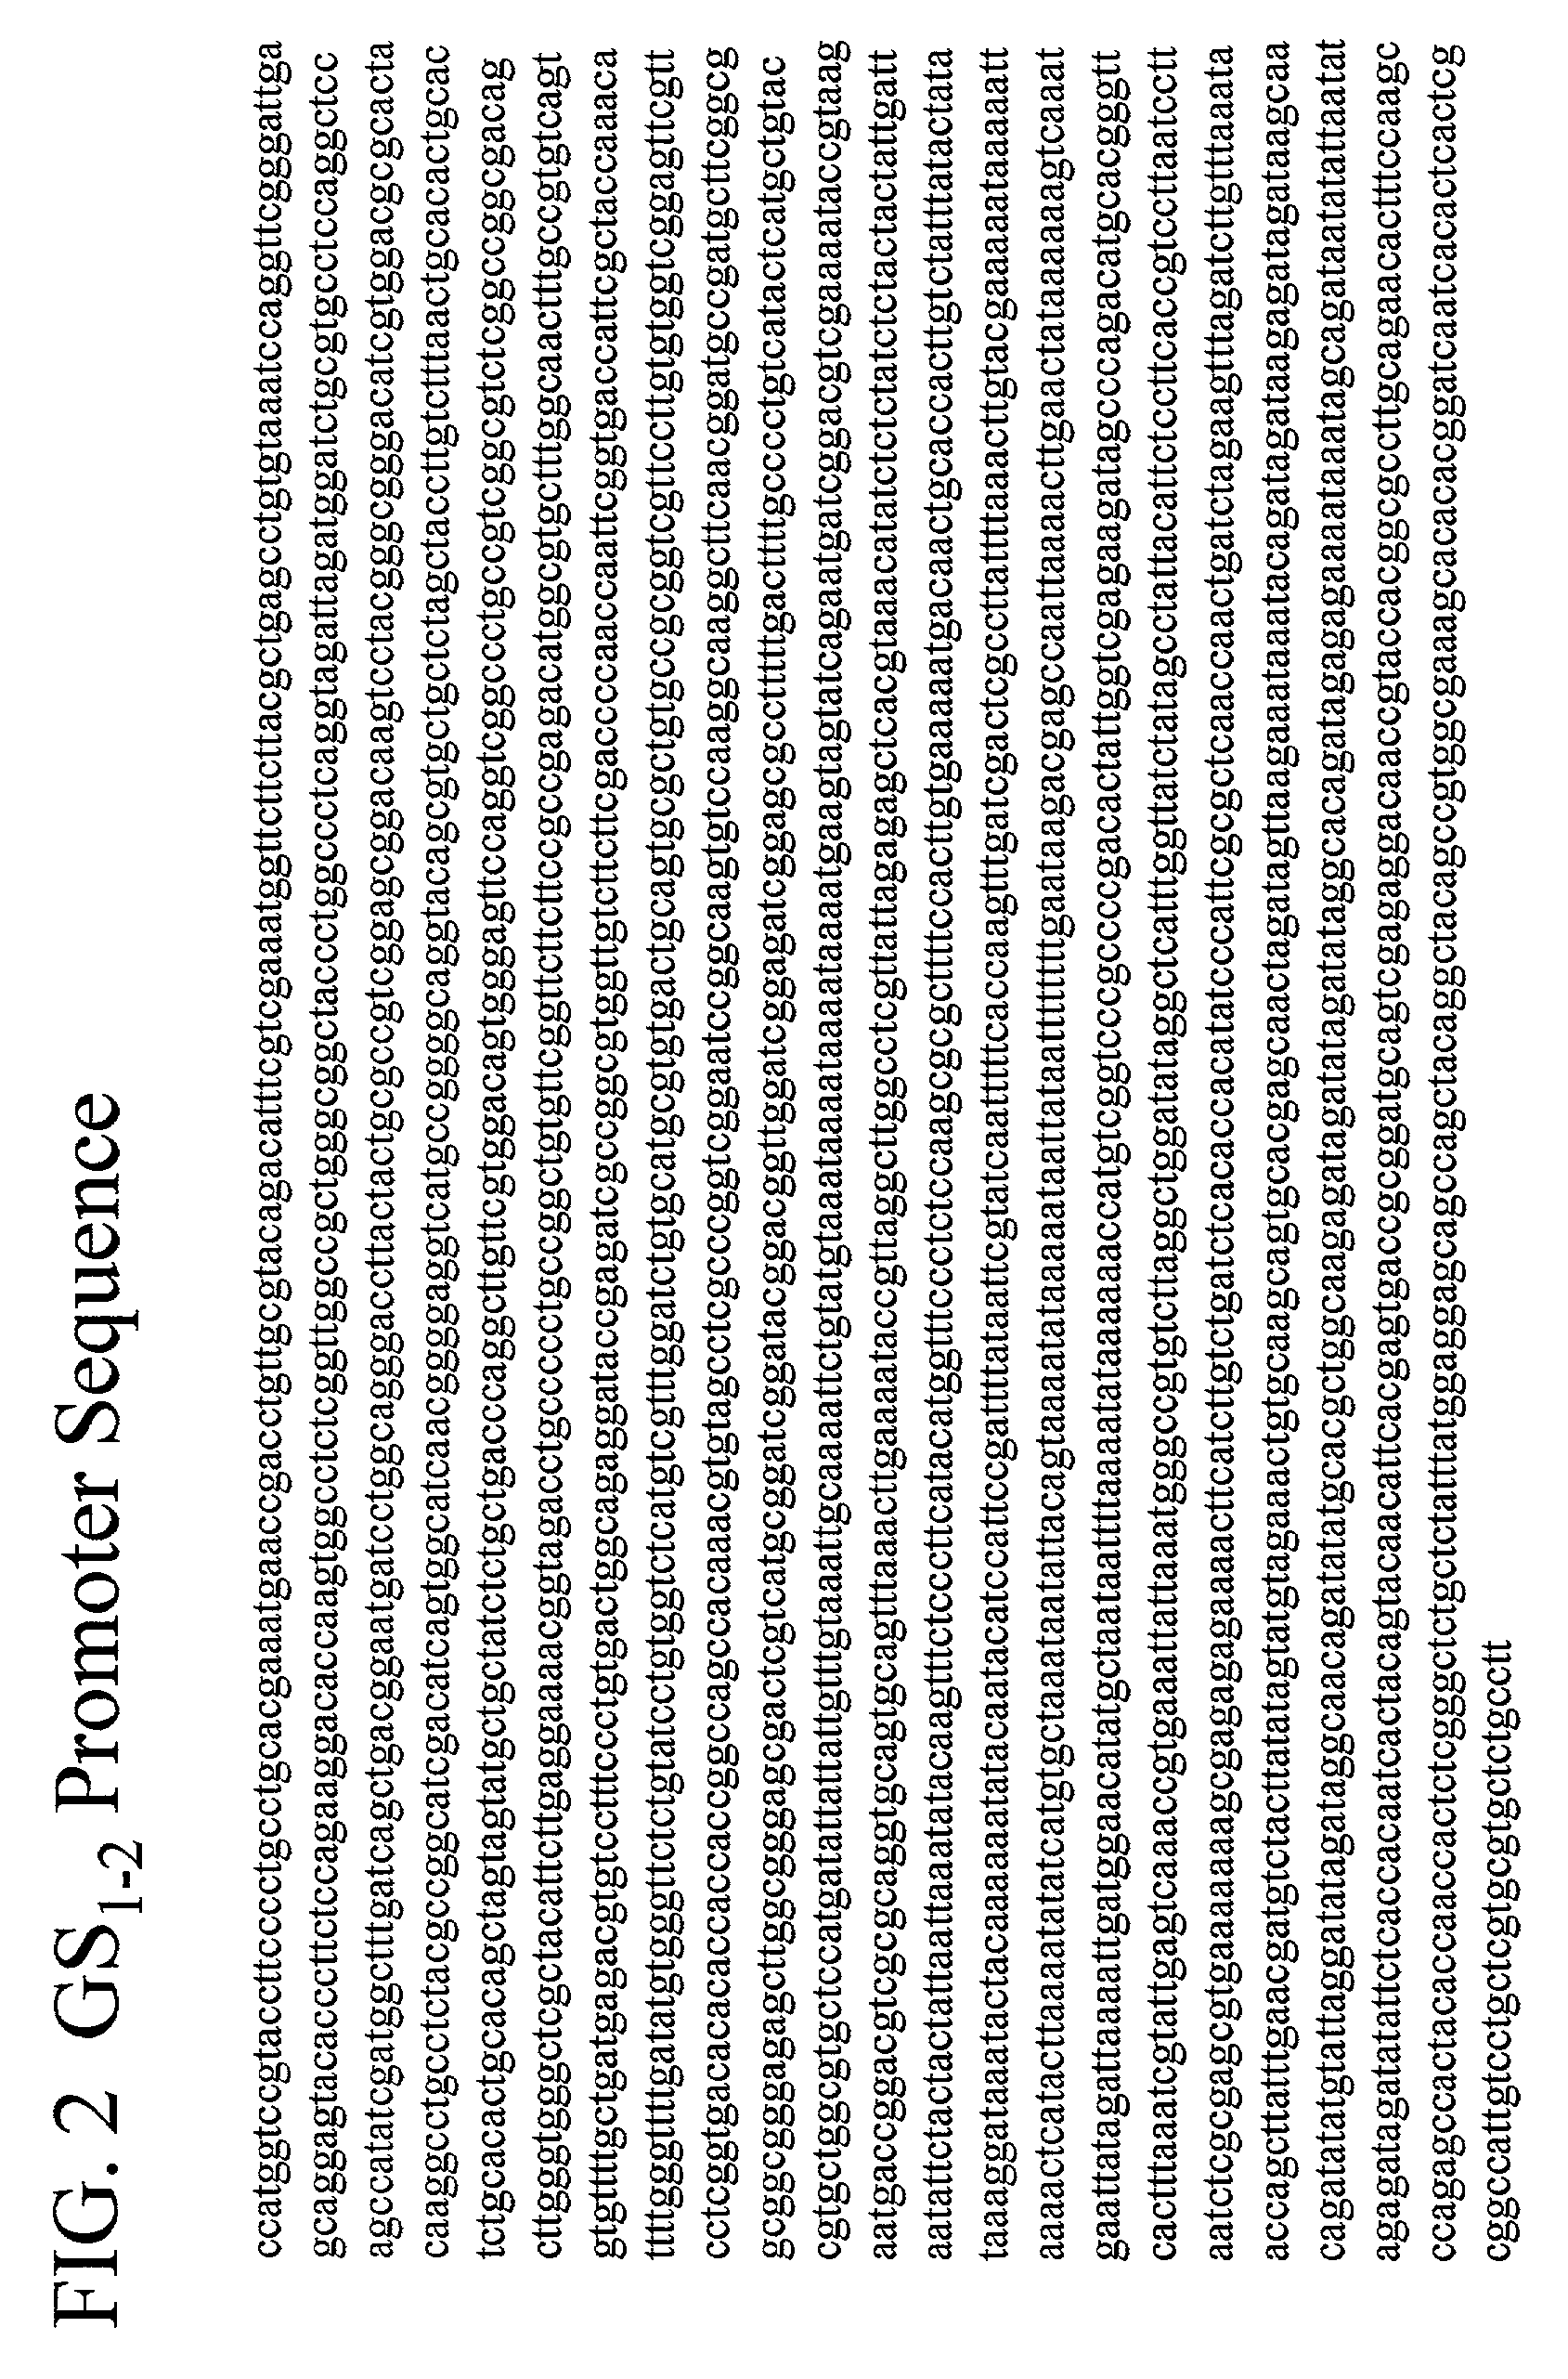 Maize cytoplasmic glutamine synthetase promoter compositions and methods for use thereof